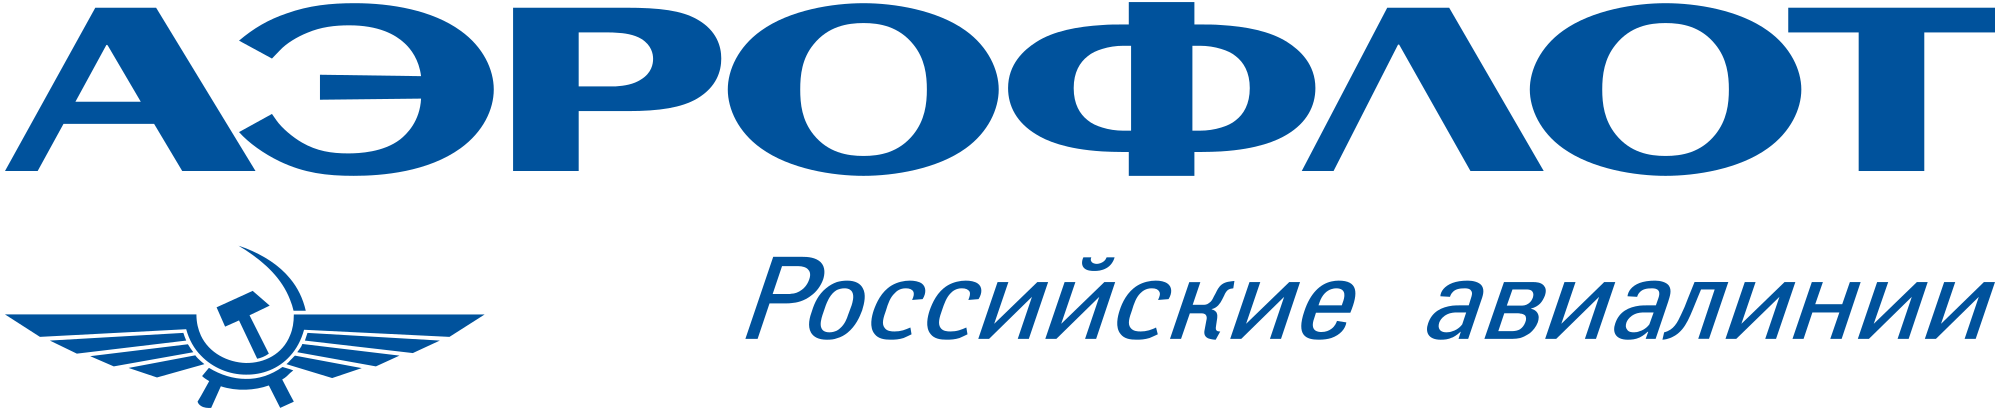 Russia Airline Logo - File:Aeroflot Russian Airlines logo (Russian).svg - Wikimedia Commons